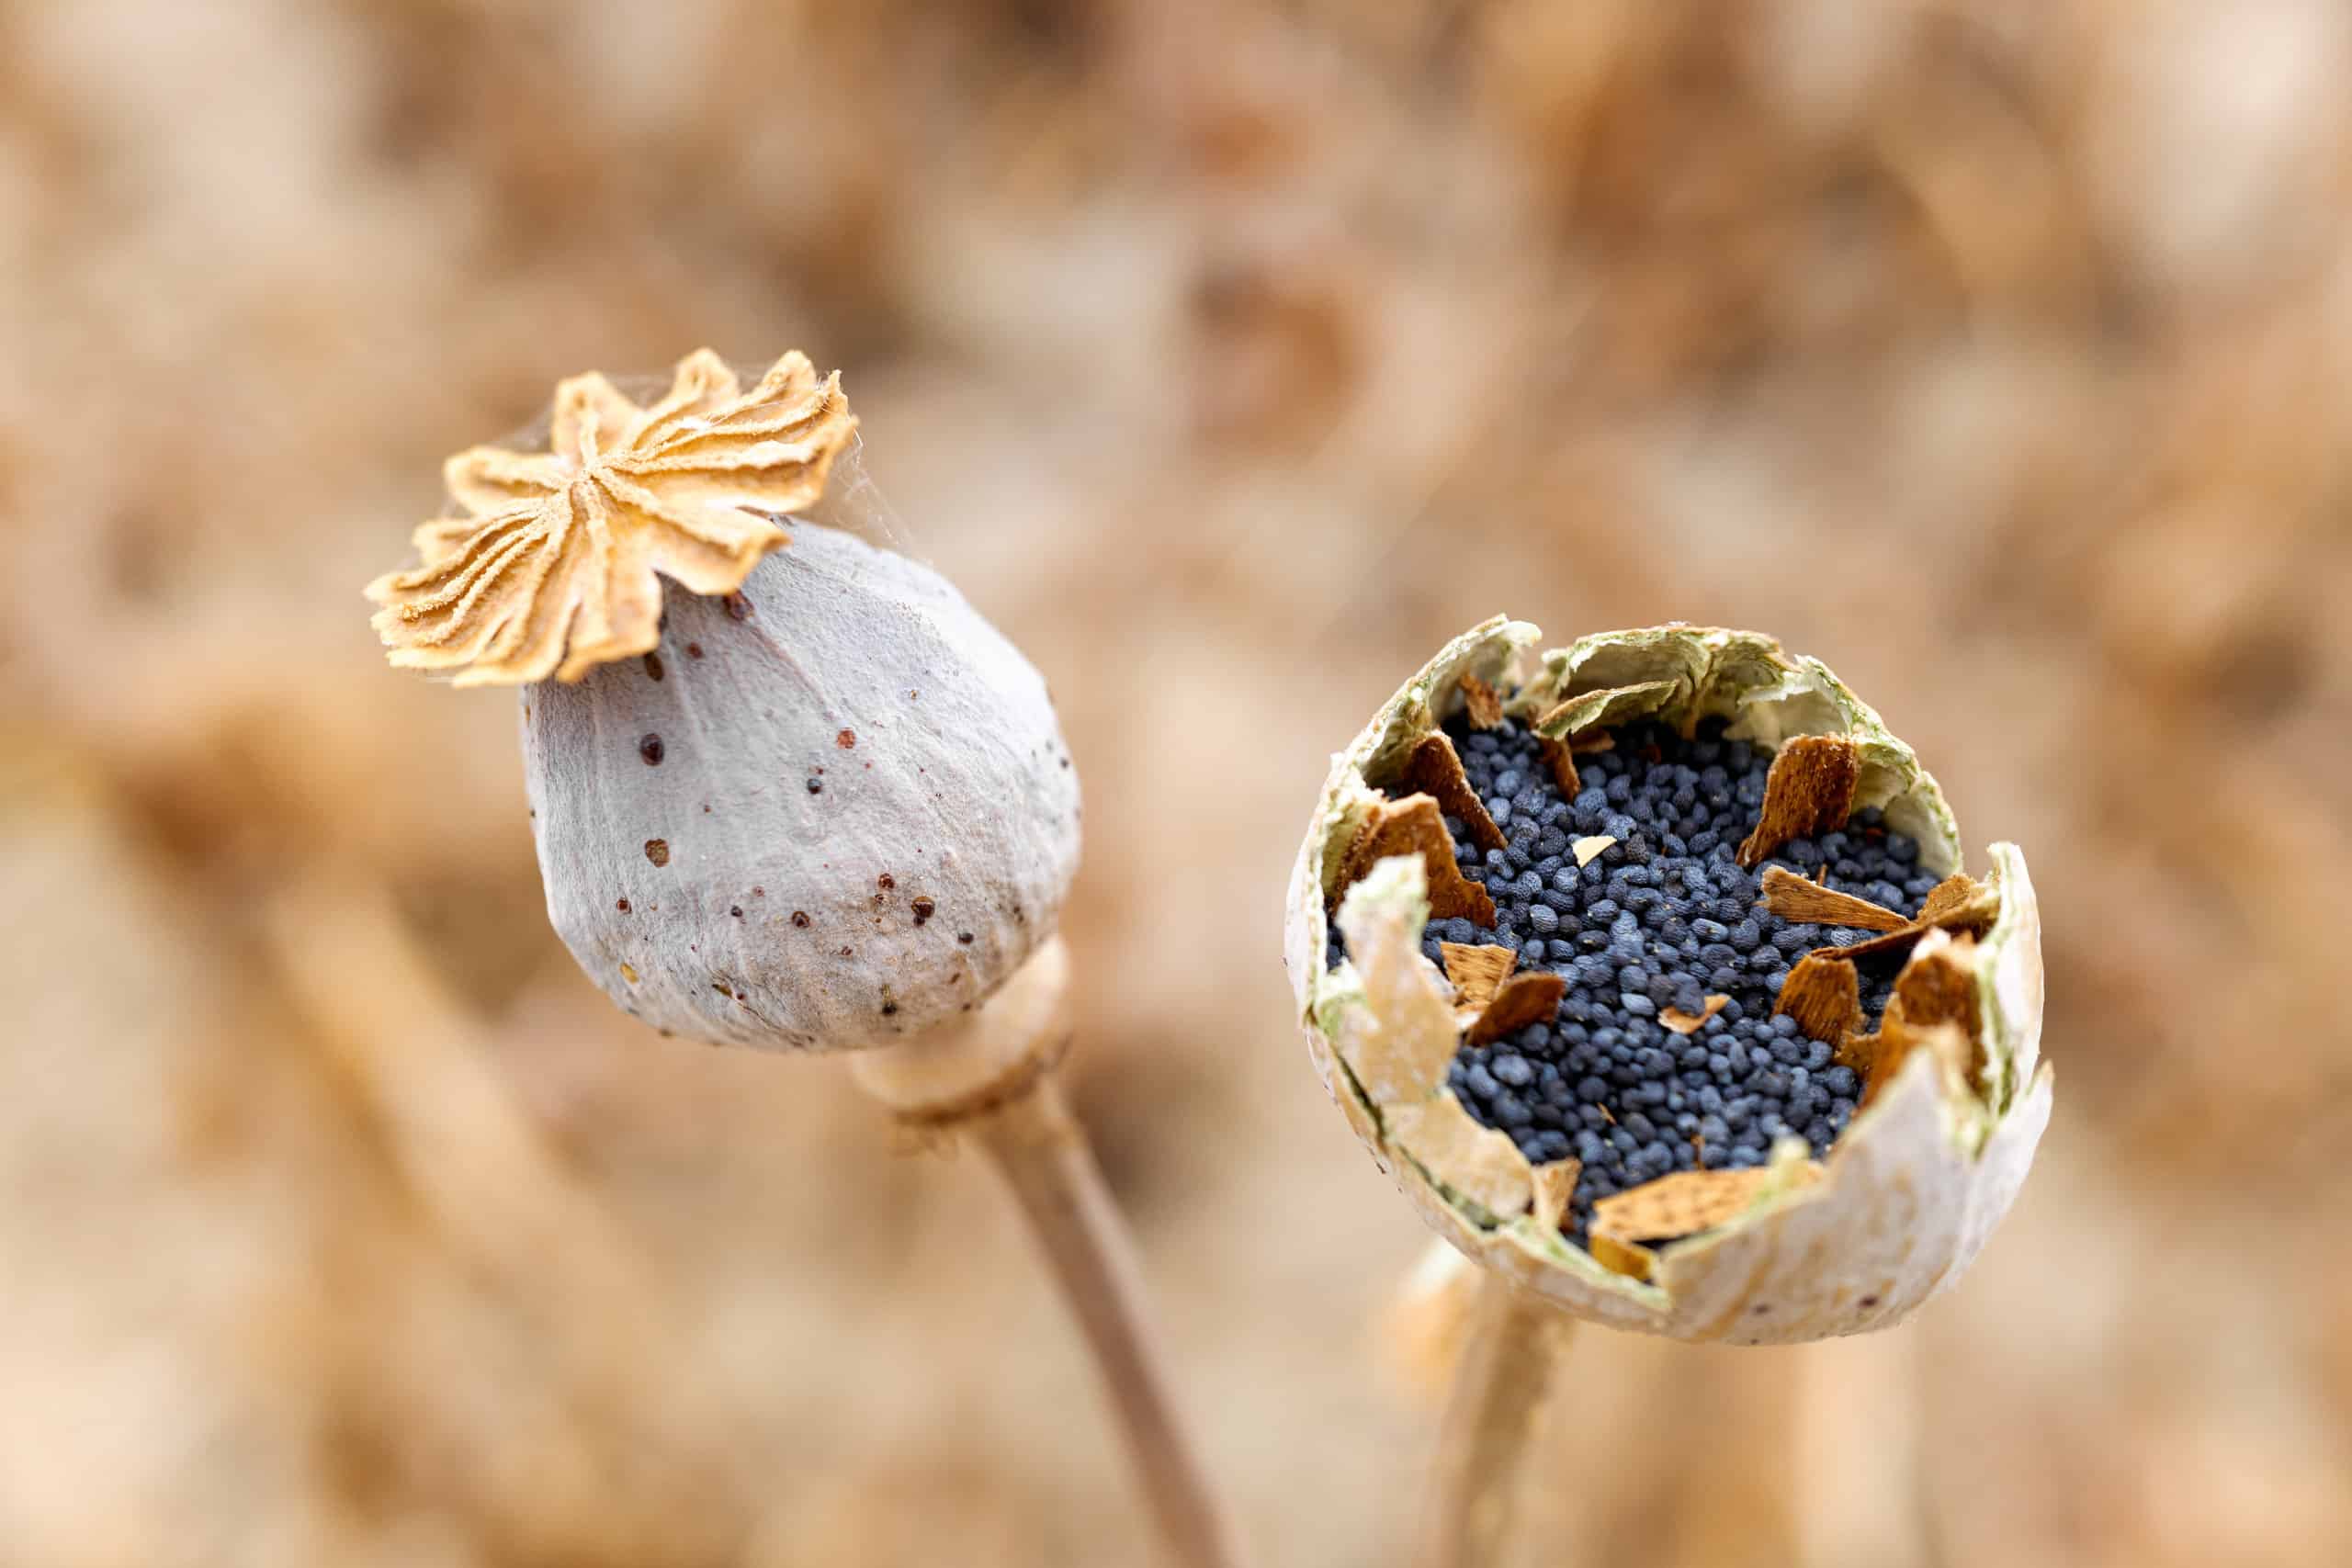 Can Dogs Eat Poppy Seeds? How Dangerous Are They?